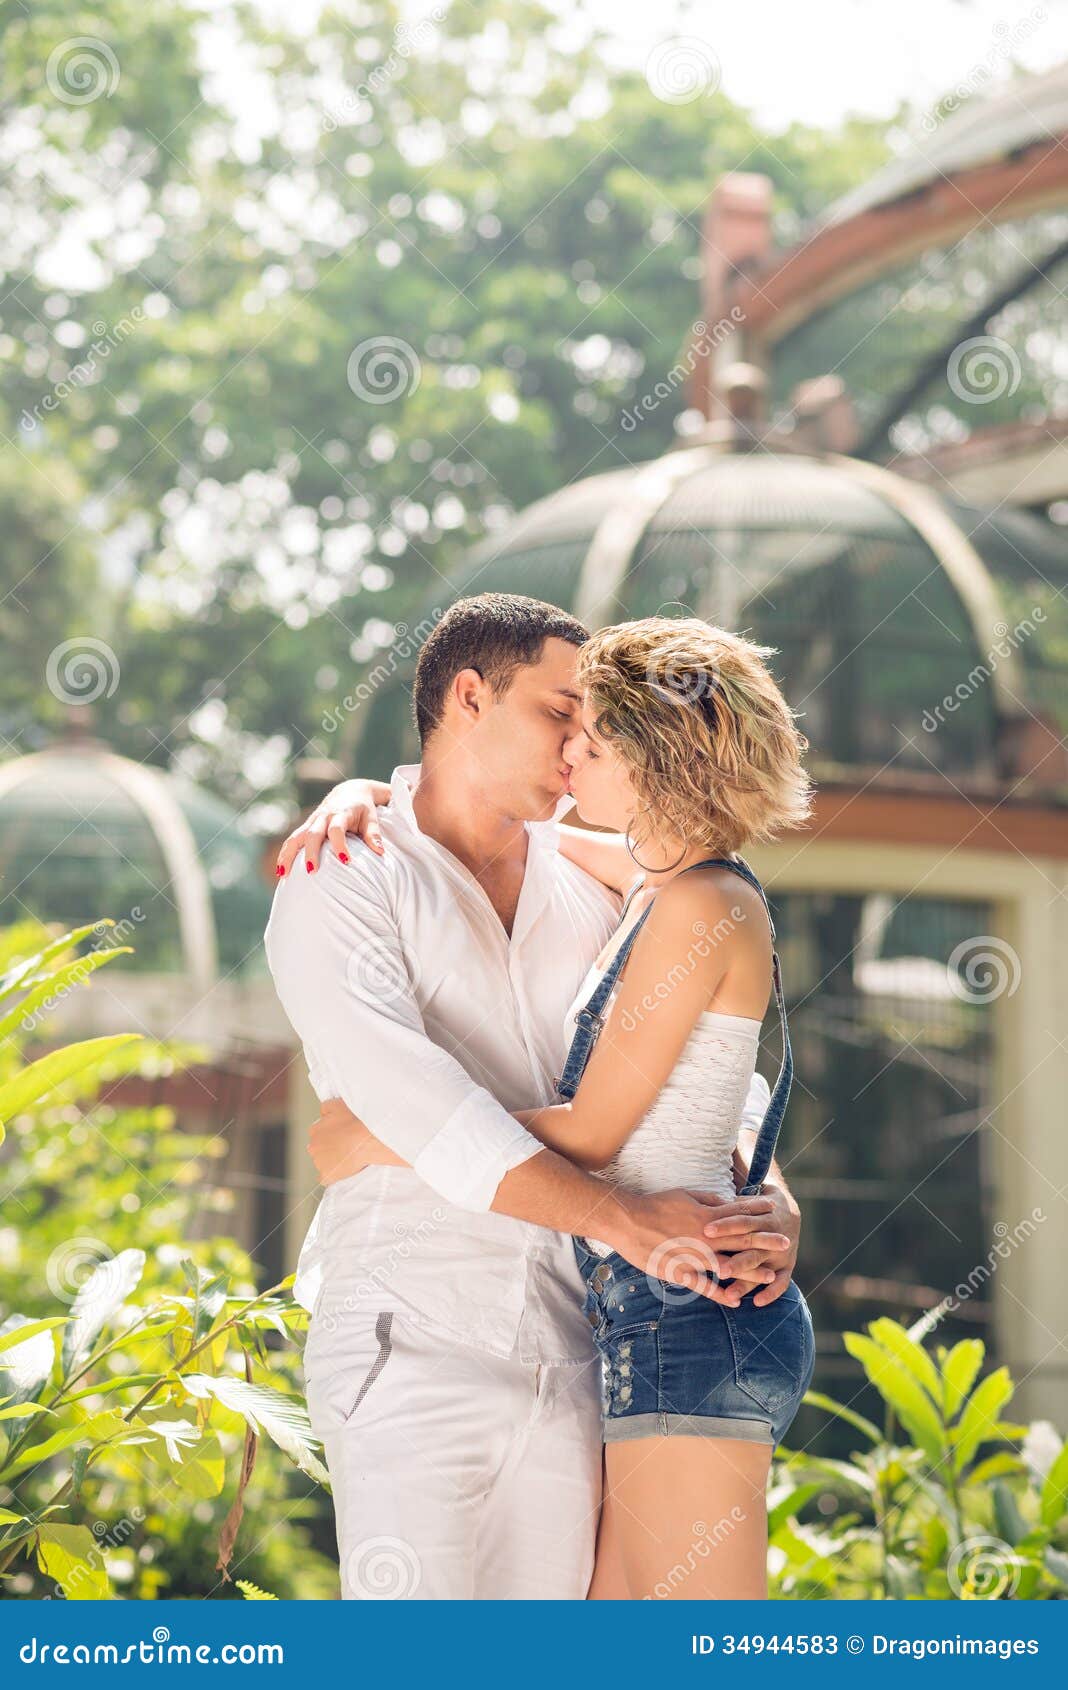 Kiss Of Love Stock Image Image Of Hugging Affection